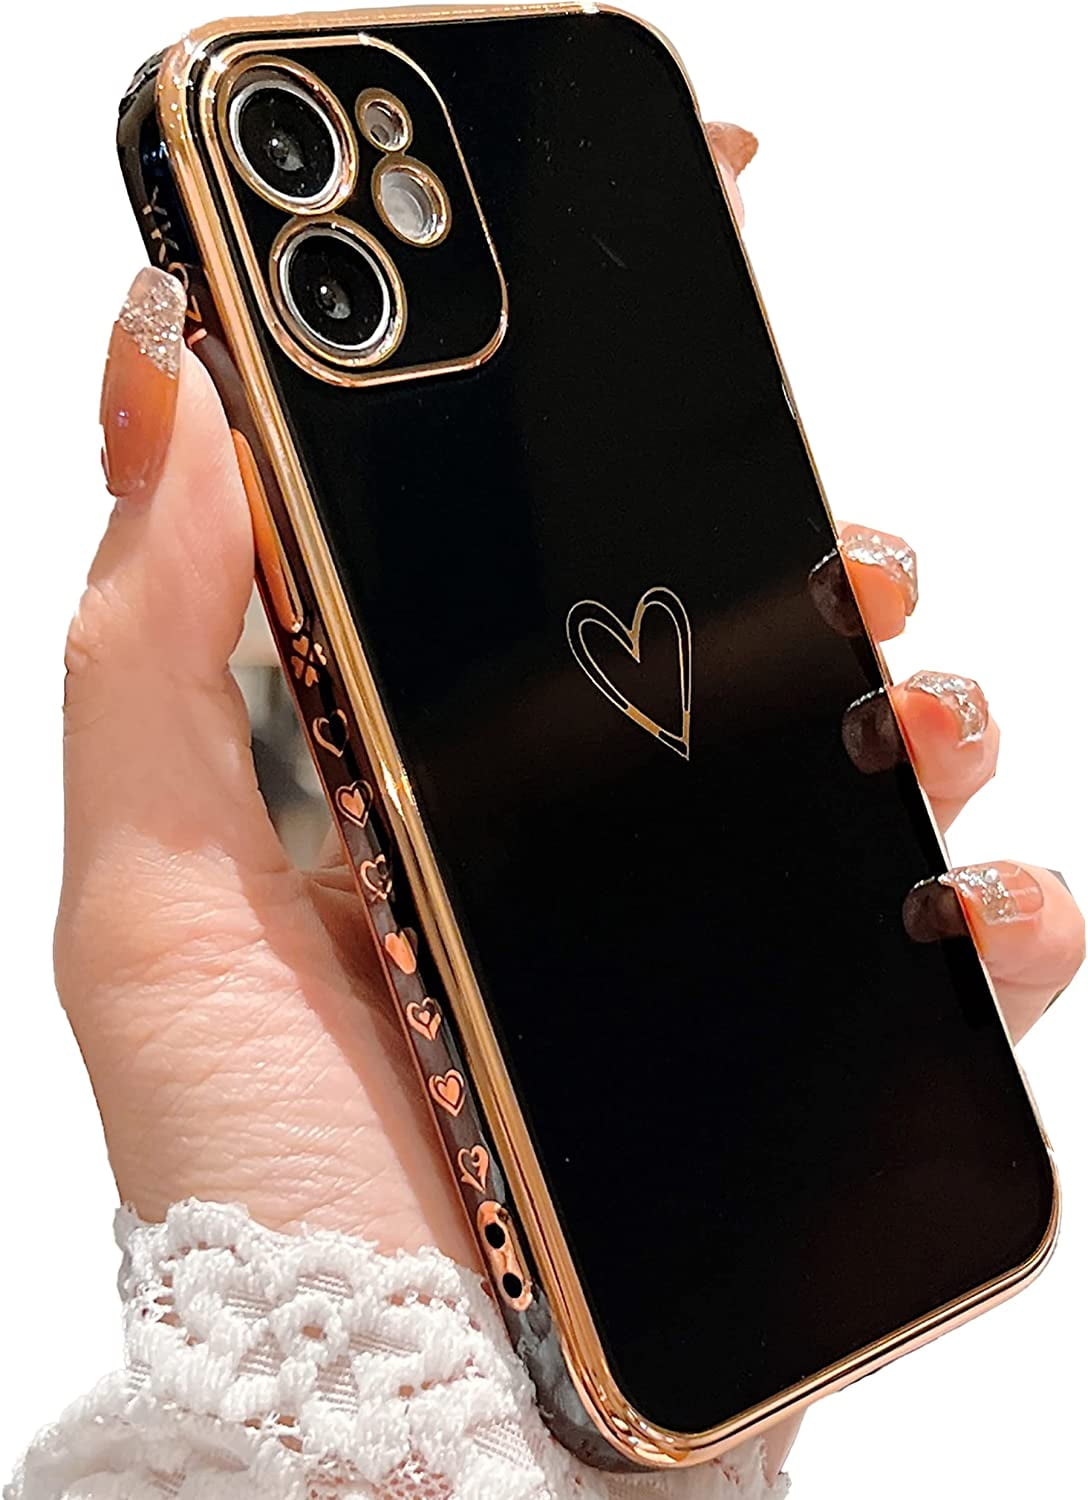 Compatible with iPhone 12 Mini Case for Women Girl, Luxury Plating Edge  Bumper Cute Case with Full Camera Lens Protection Cover for iPhone 12 Mini  5.4